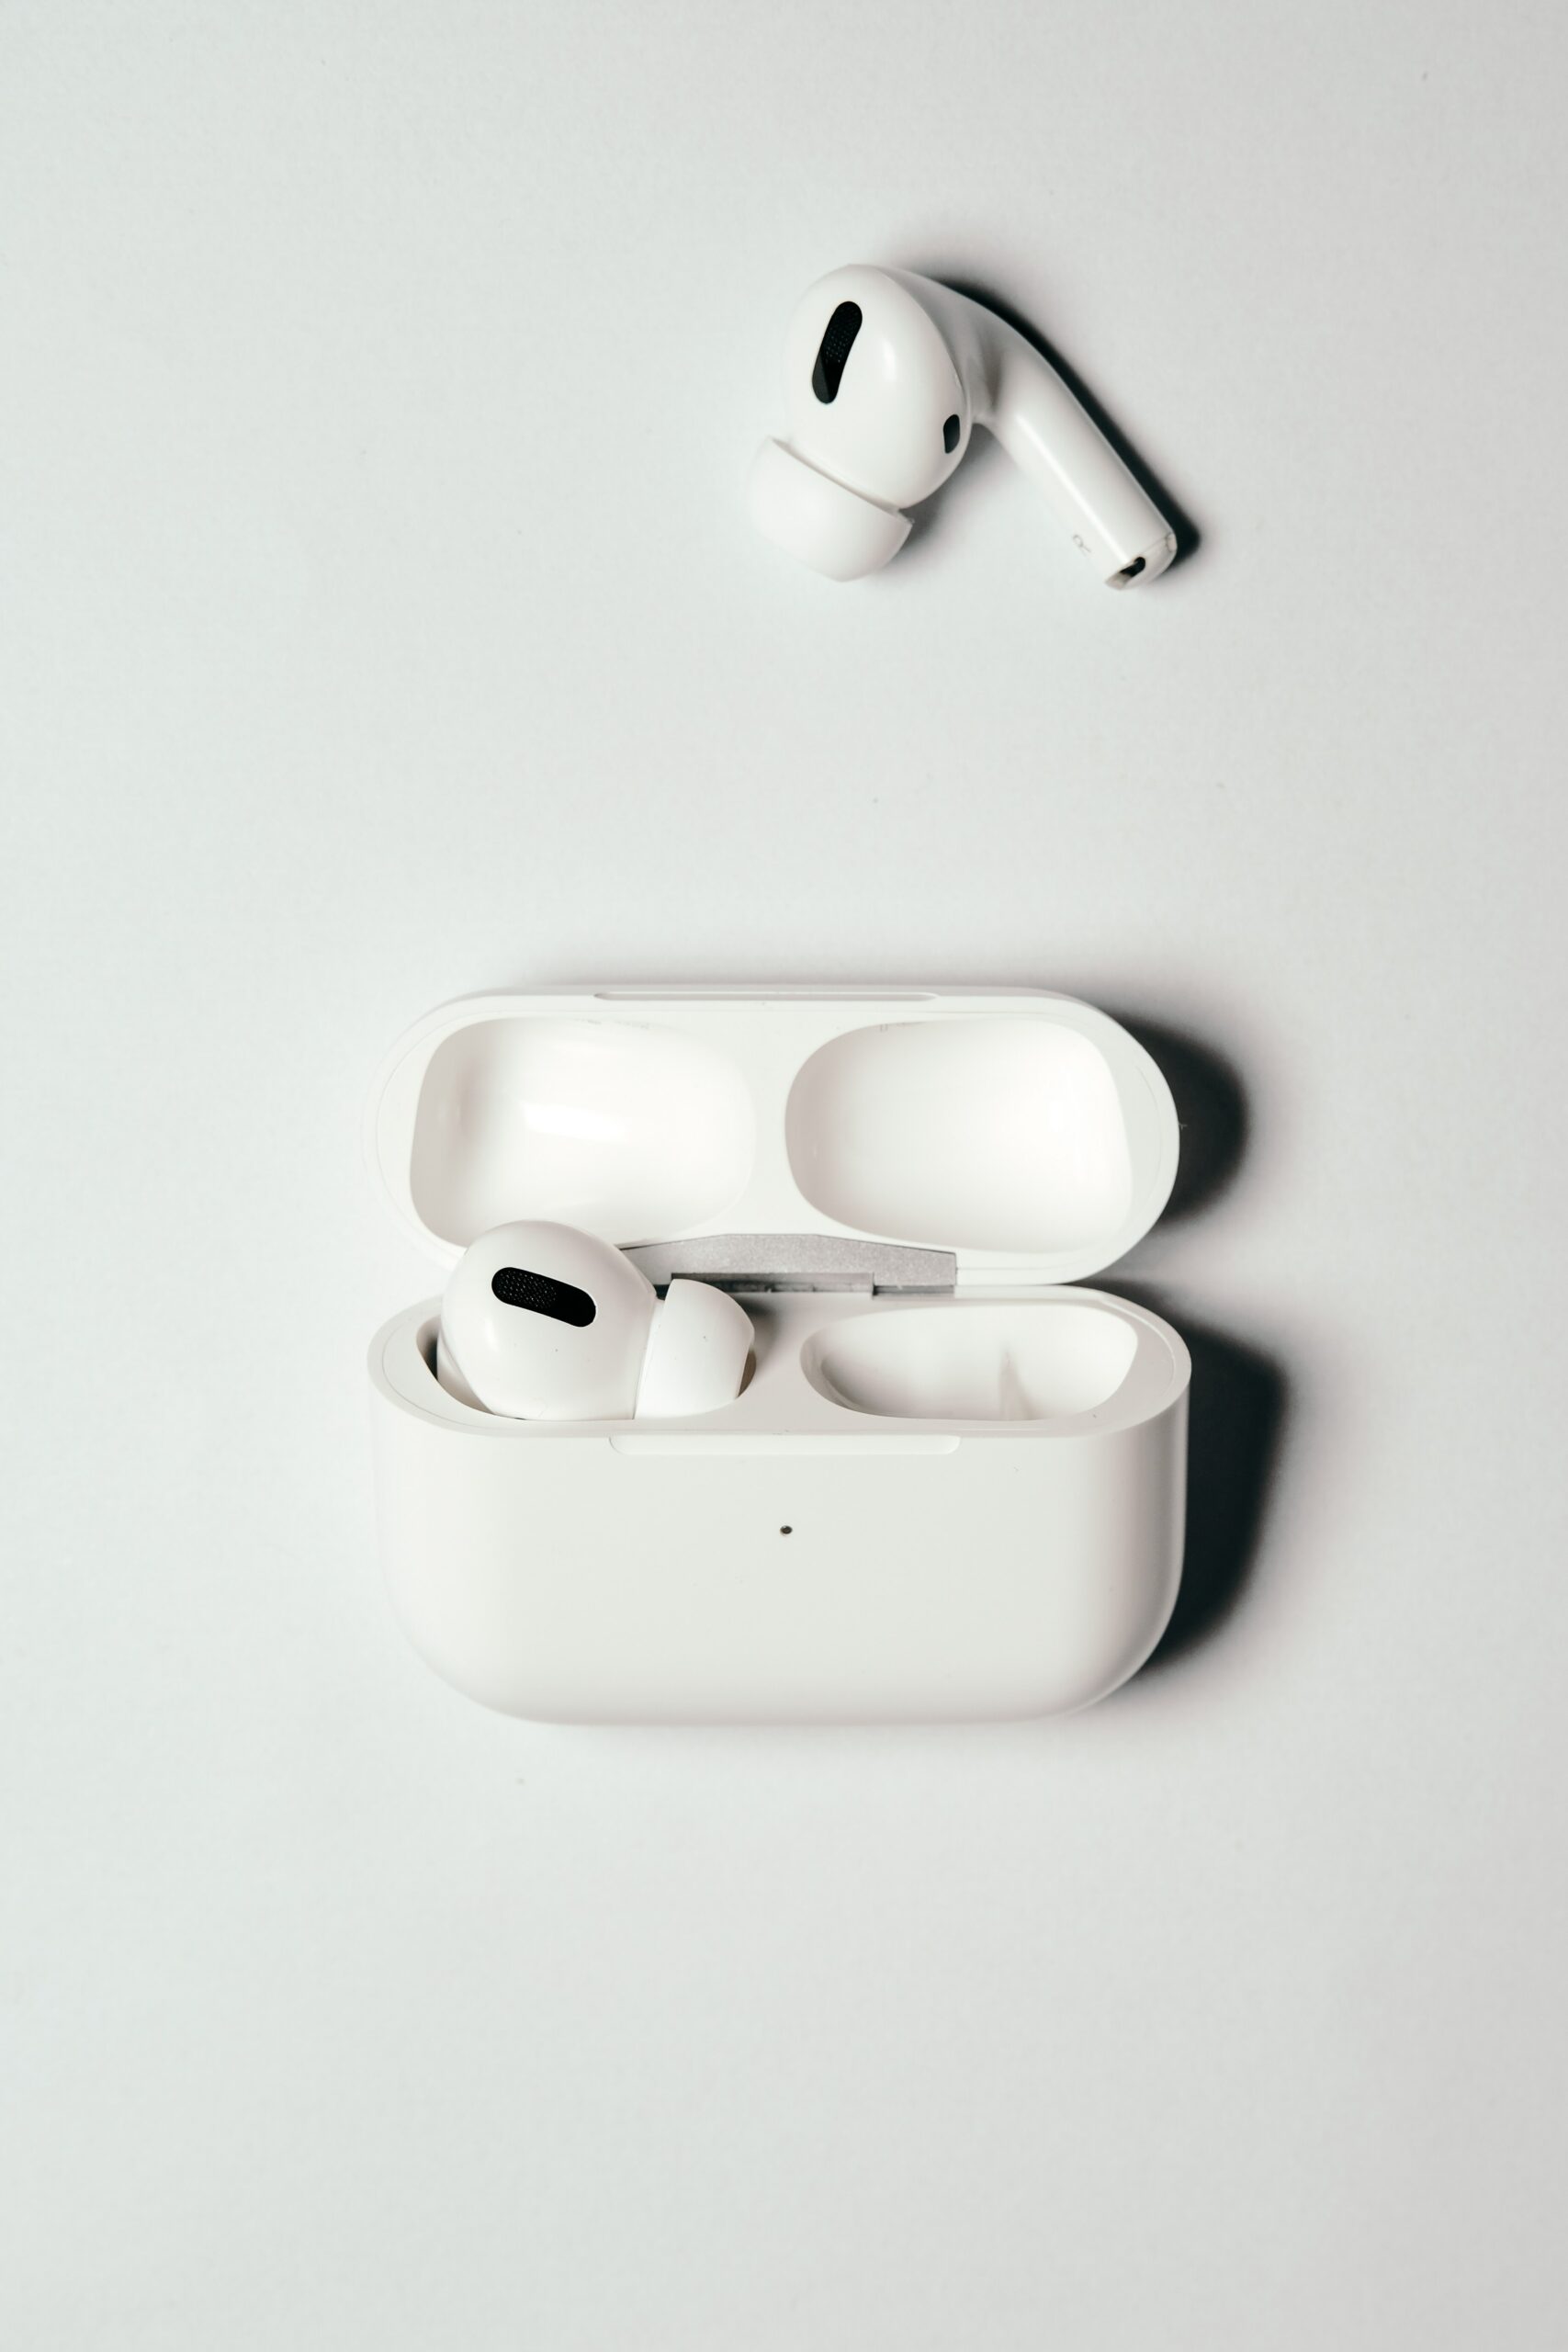 Top 8 AirPod Dupes That Won’t Break the Bank